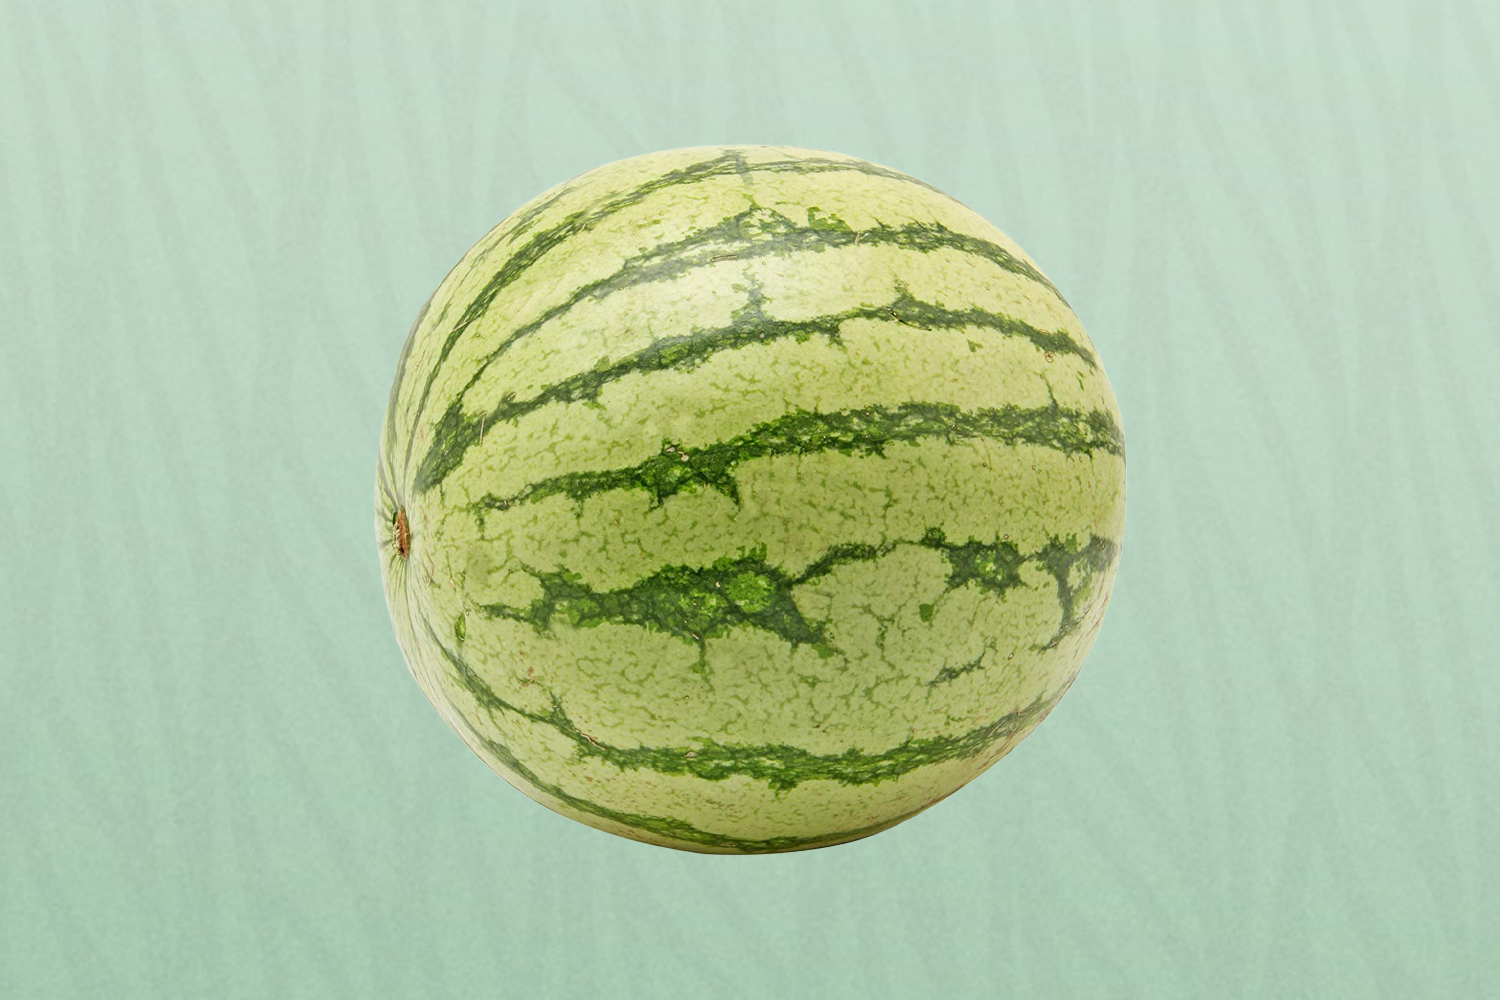 Watermelon is one of the best healthy snacks to eat when you're high in 2022 because it is sweet, flavorful, juicy and delicious